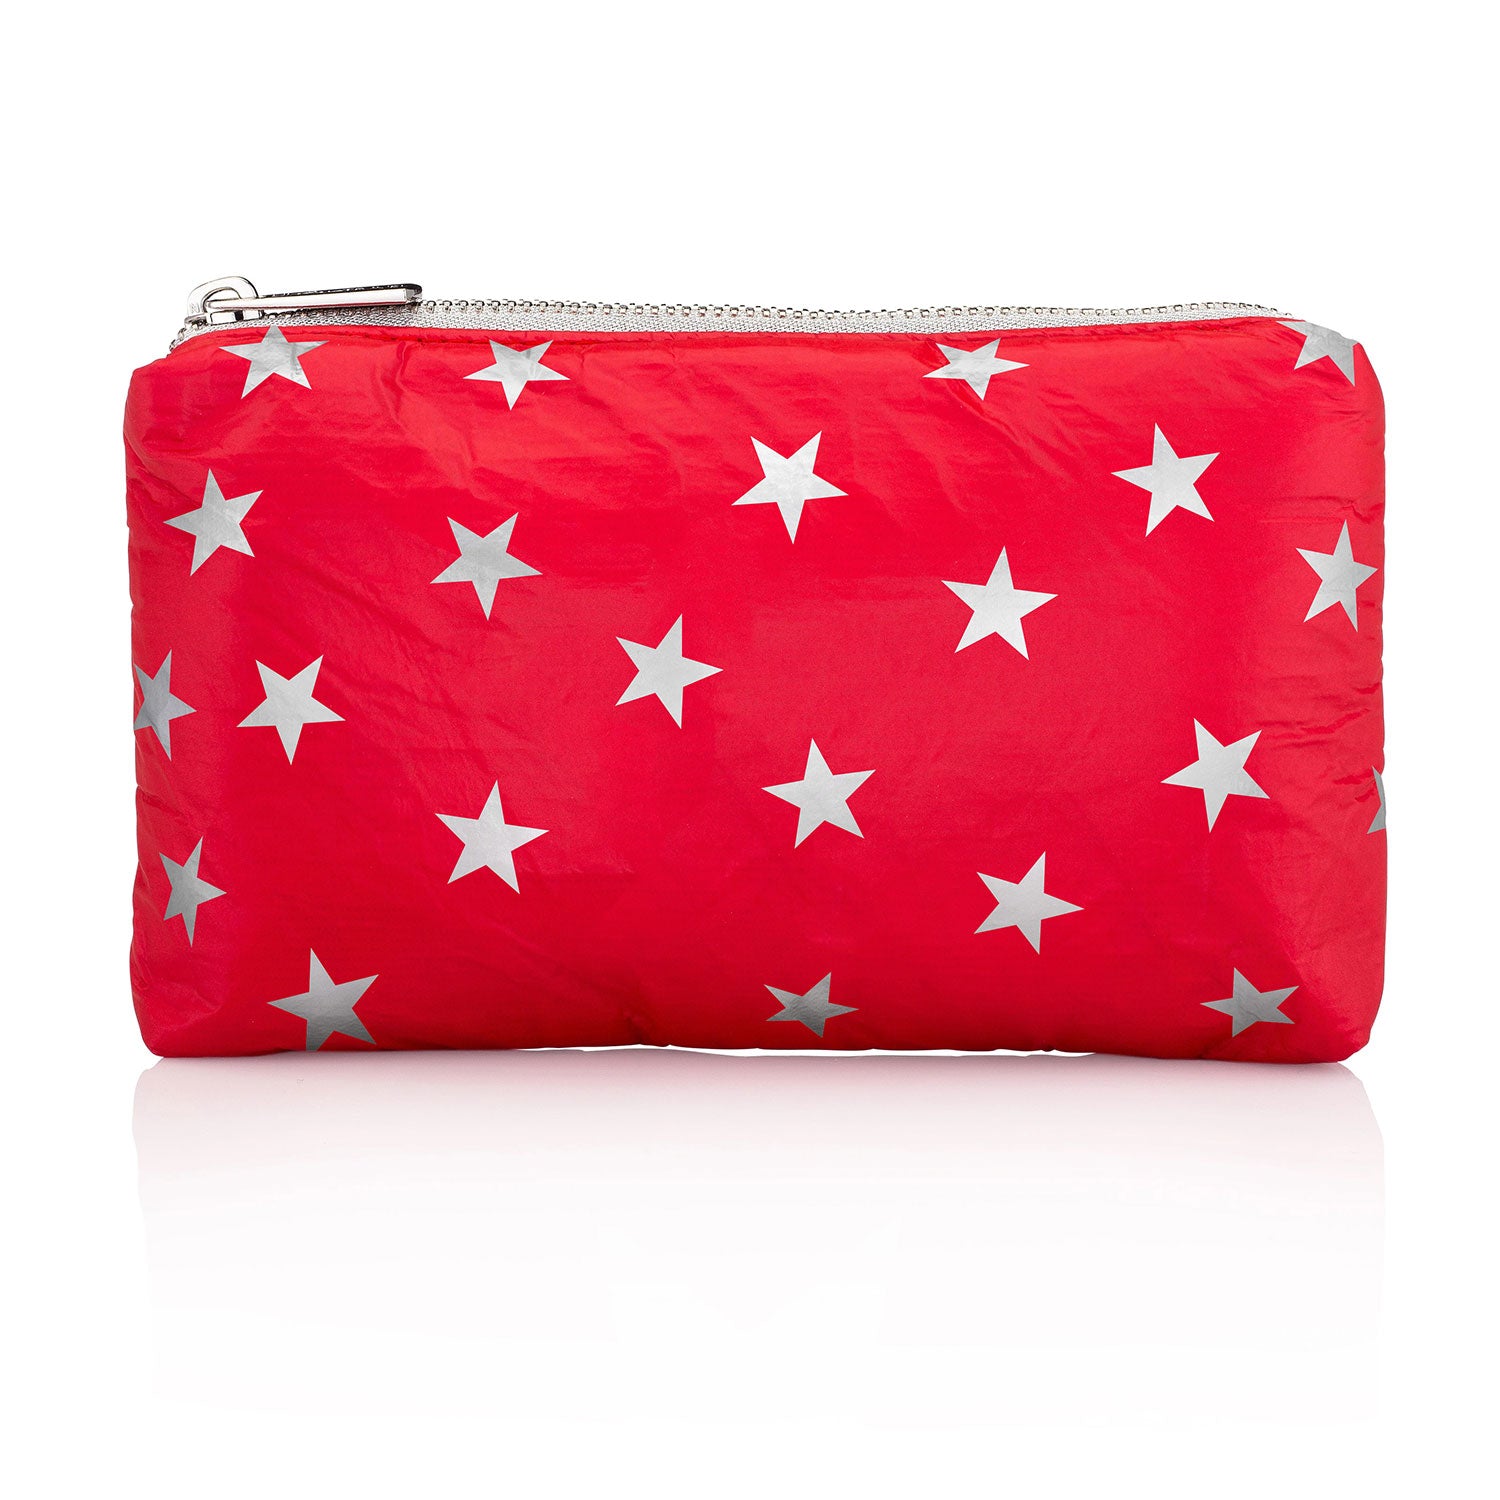 Holiday Clutch - Makeup Pouch - Mini Padded Pack - Chili Pepper Red with Myriad Silver Stars